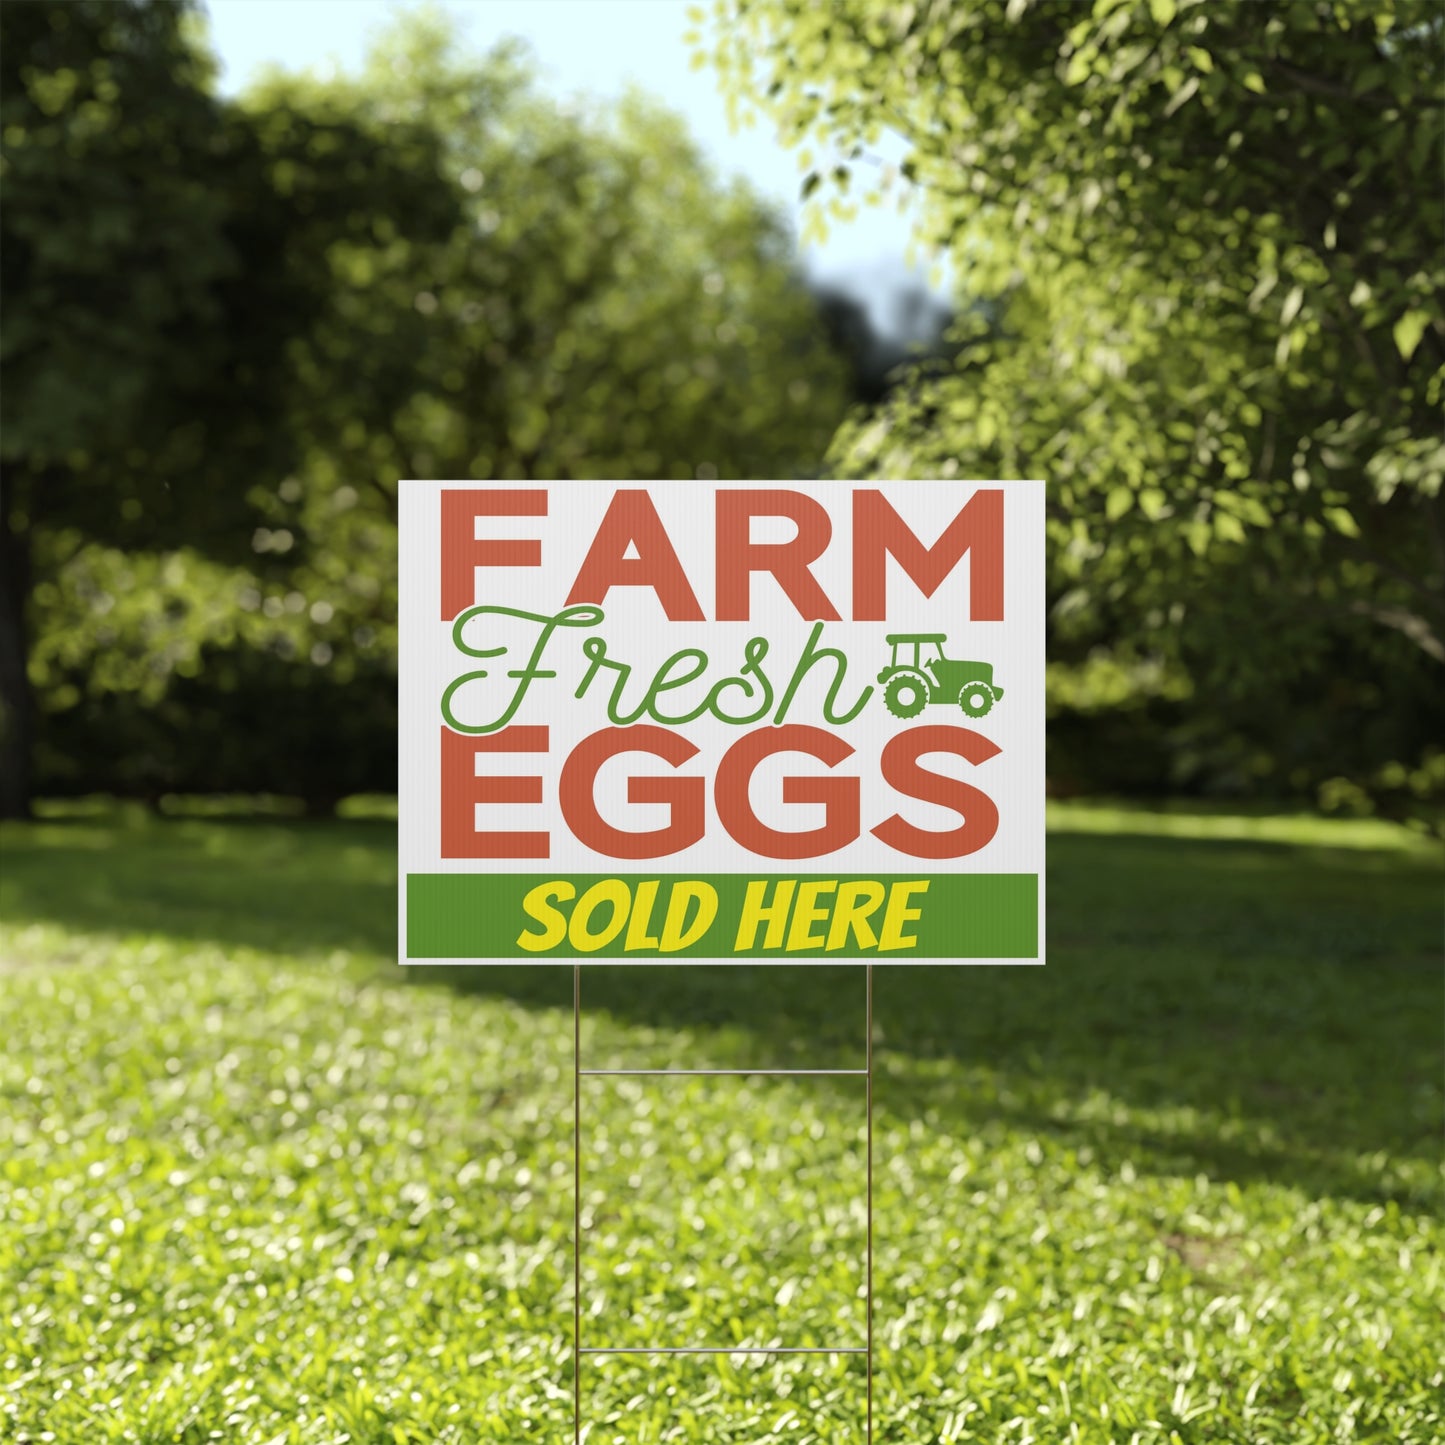 Farm Fresh Eggs Sold Here Yard Sign, 18x12, 24x18, 36x24, H-Stake Included, v4